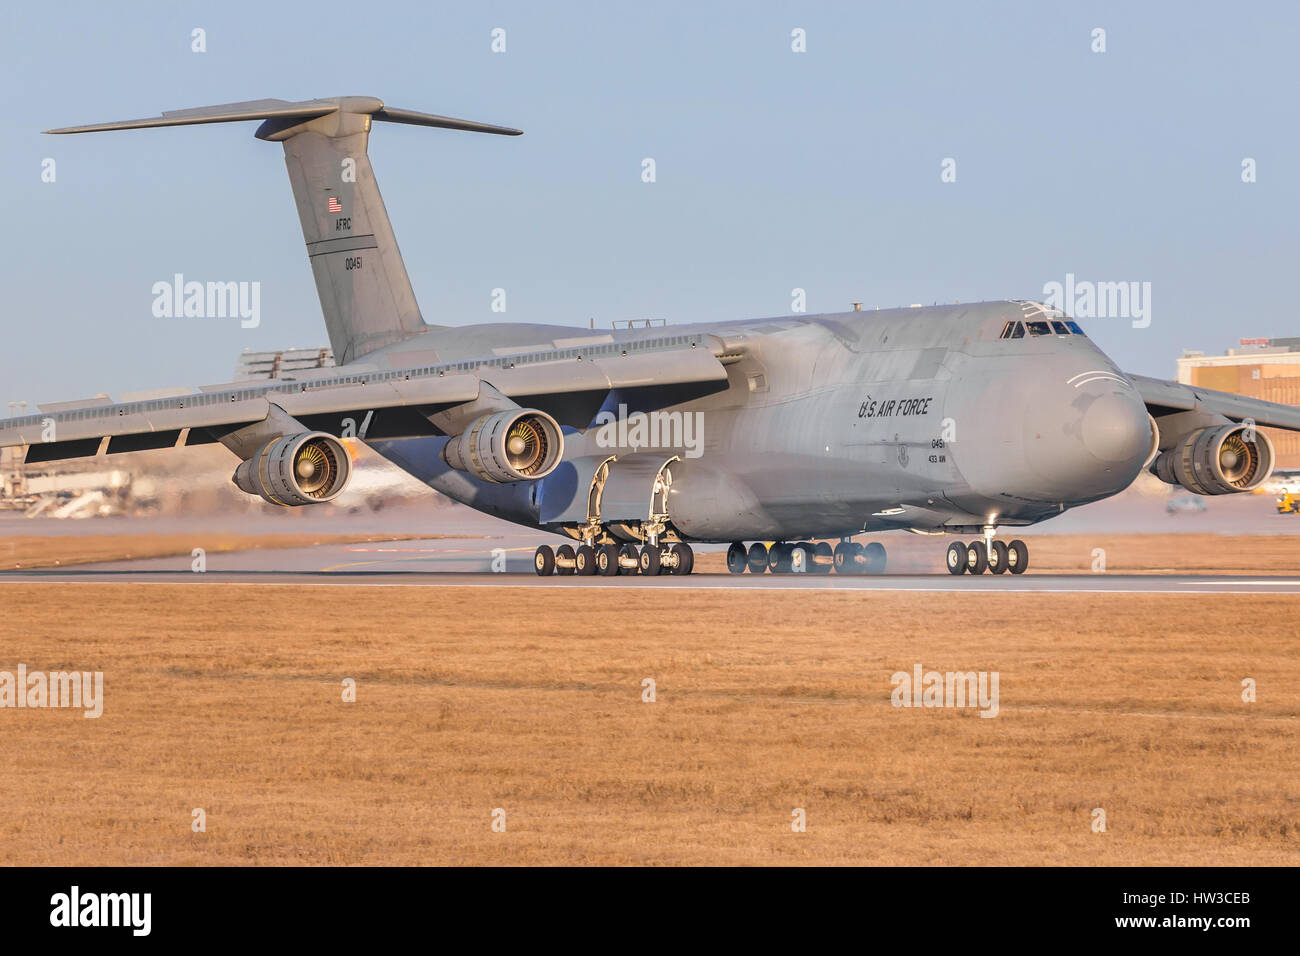 Stuttgart/Germany March 13, 2017: C5-M Super Galaxy from USA Airforce at Stuttgart Airport. Stock Photo